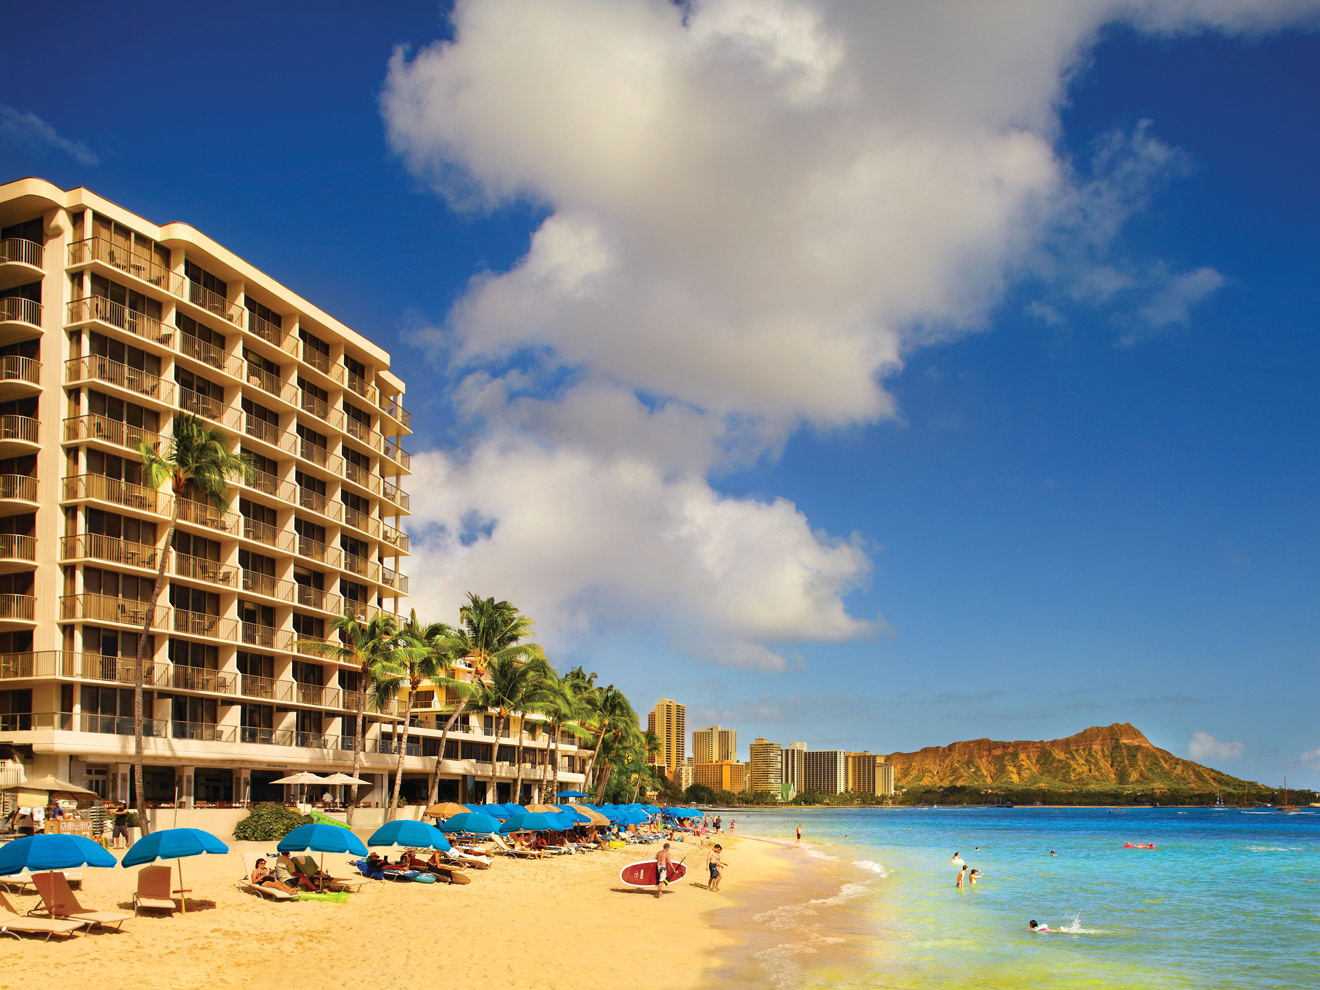 Our Stay At Outrigger Waikiki Beach Resort